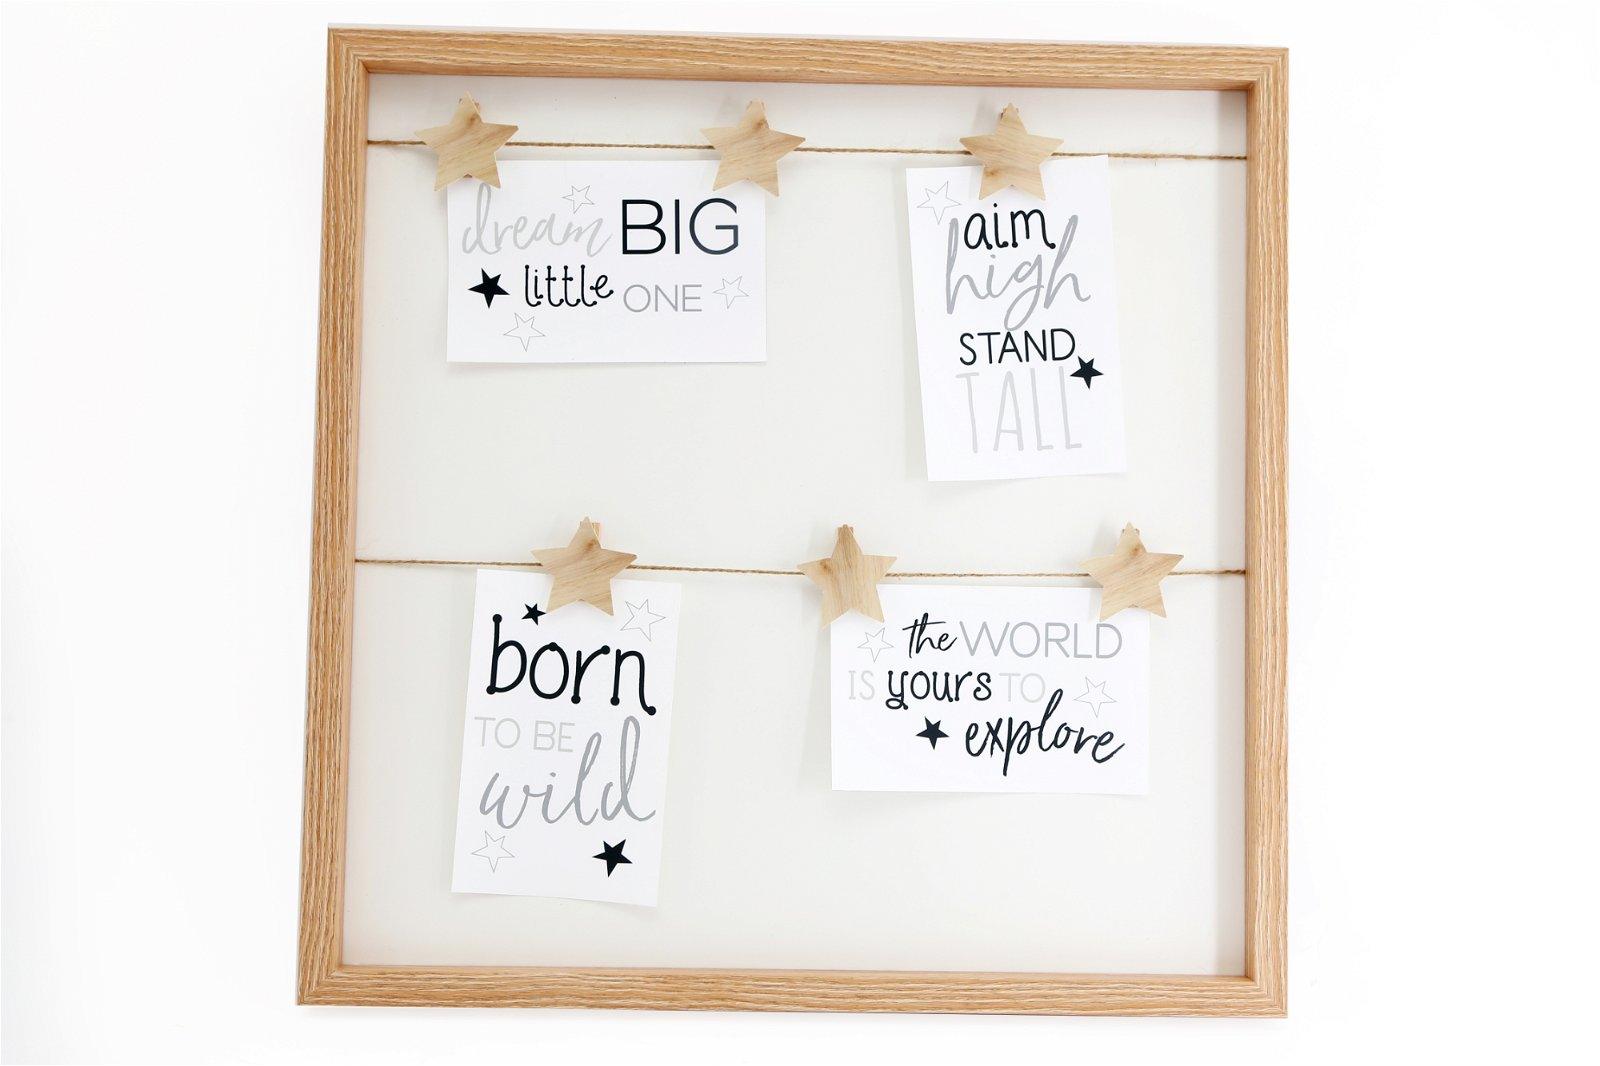 Square Photo Frame With Star Pegs For Six Photographs - £27.99 - New Baby 